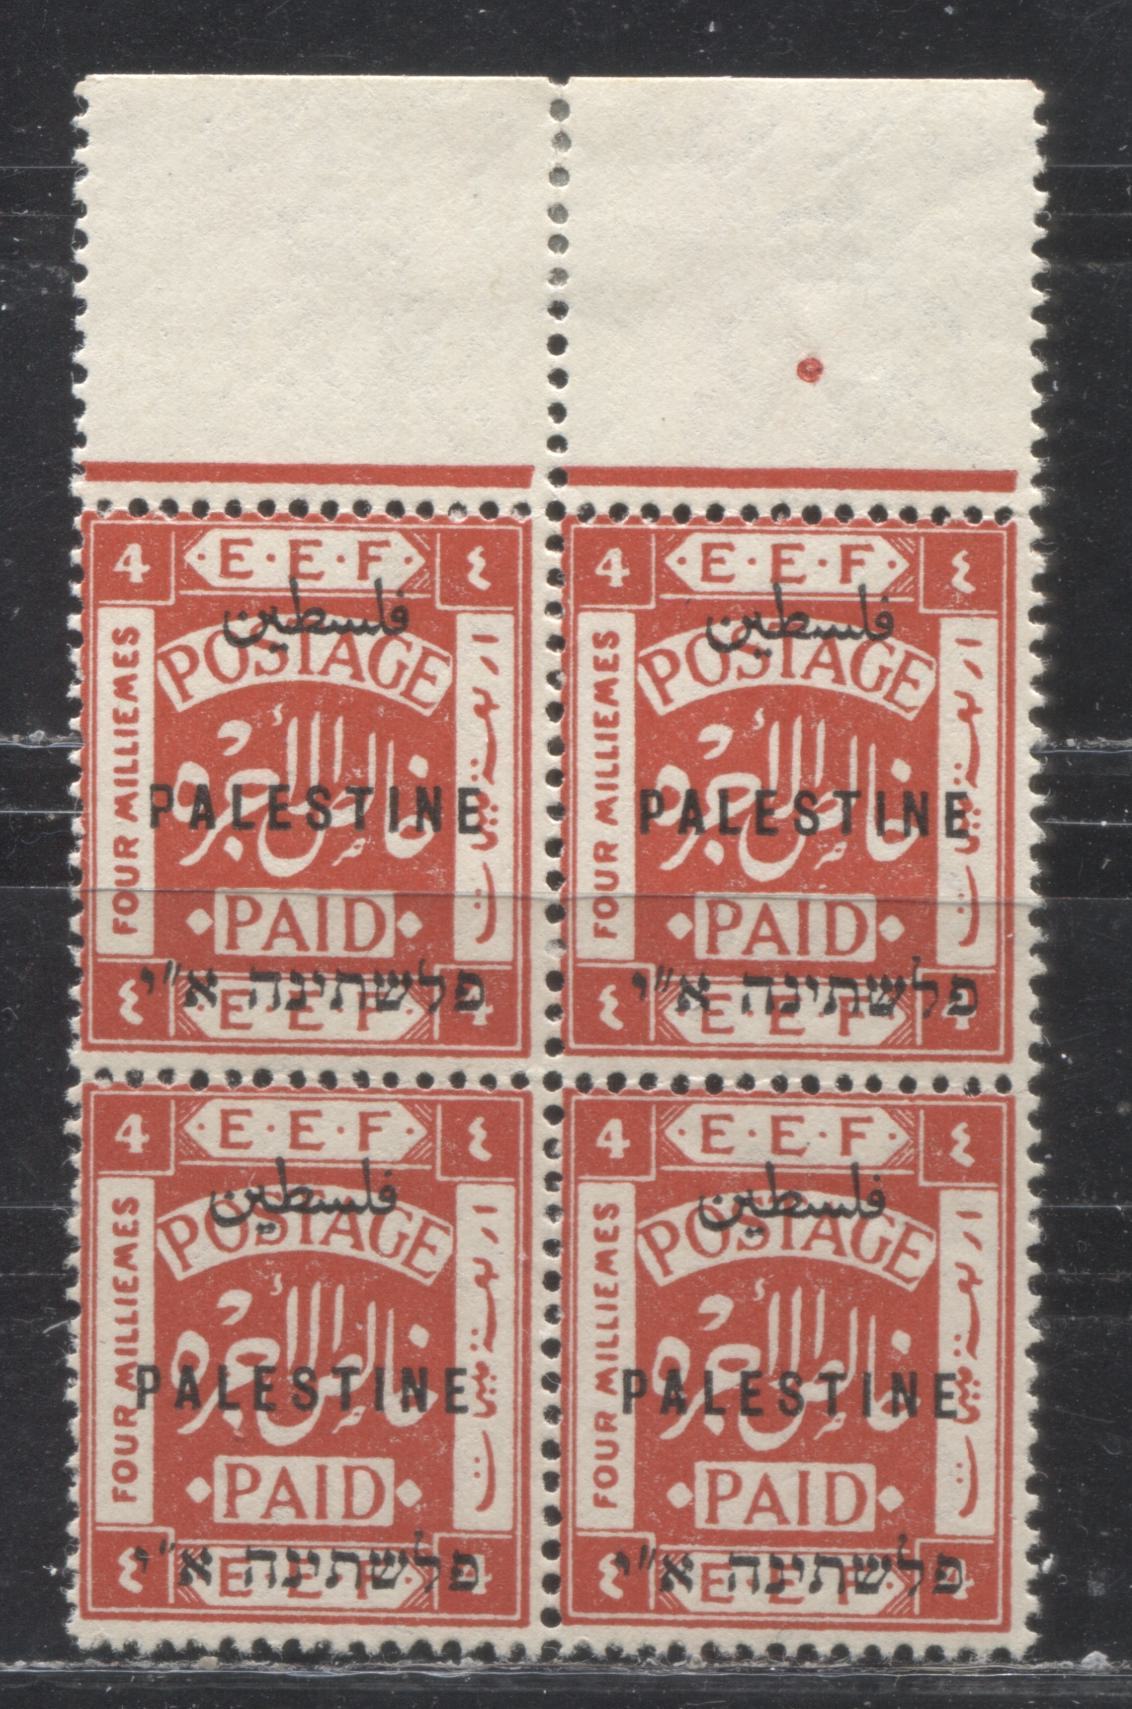 Lot 30 Palestine SG#63rp 4m Scarlet "Postage Paid" and "E.E.F" in Frame, 1921-1922 First London Overprinted Issue, A Fine OG & Fine NH Upper Sheet Margin Block of 4, Overprint Types 3-4 and 9-10, Rough Perfs.